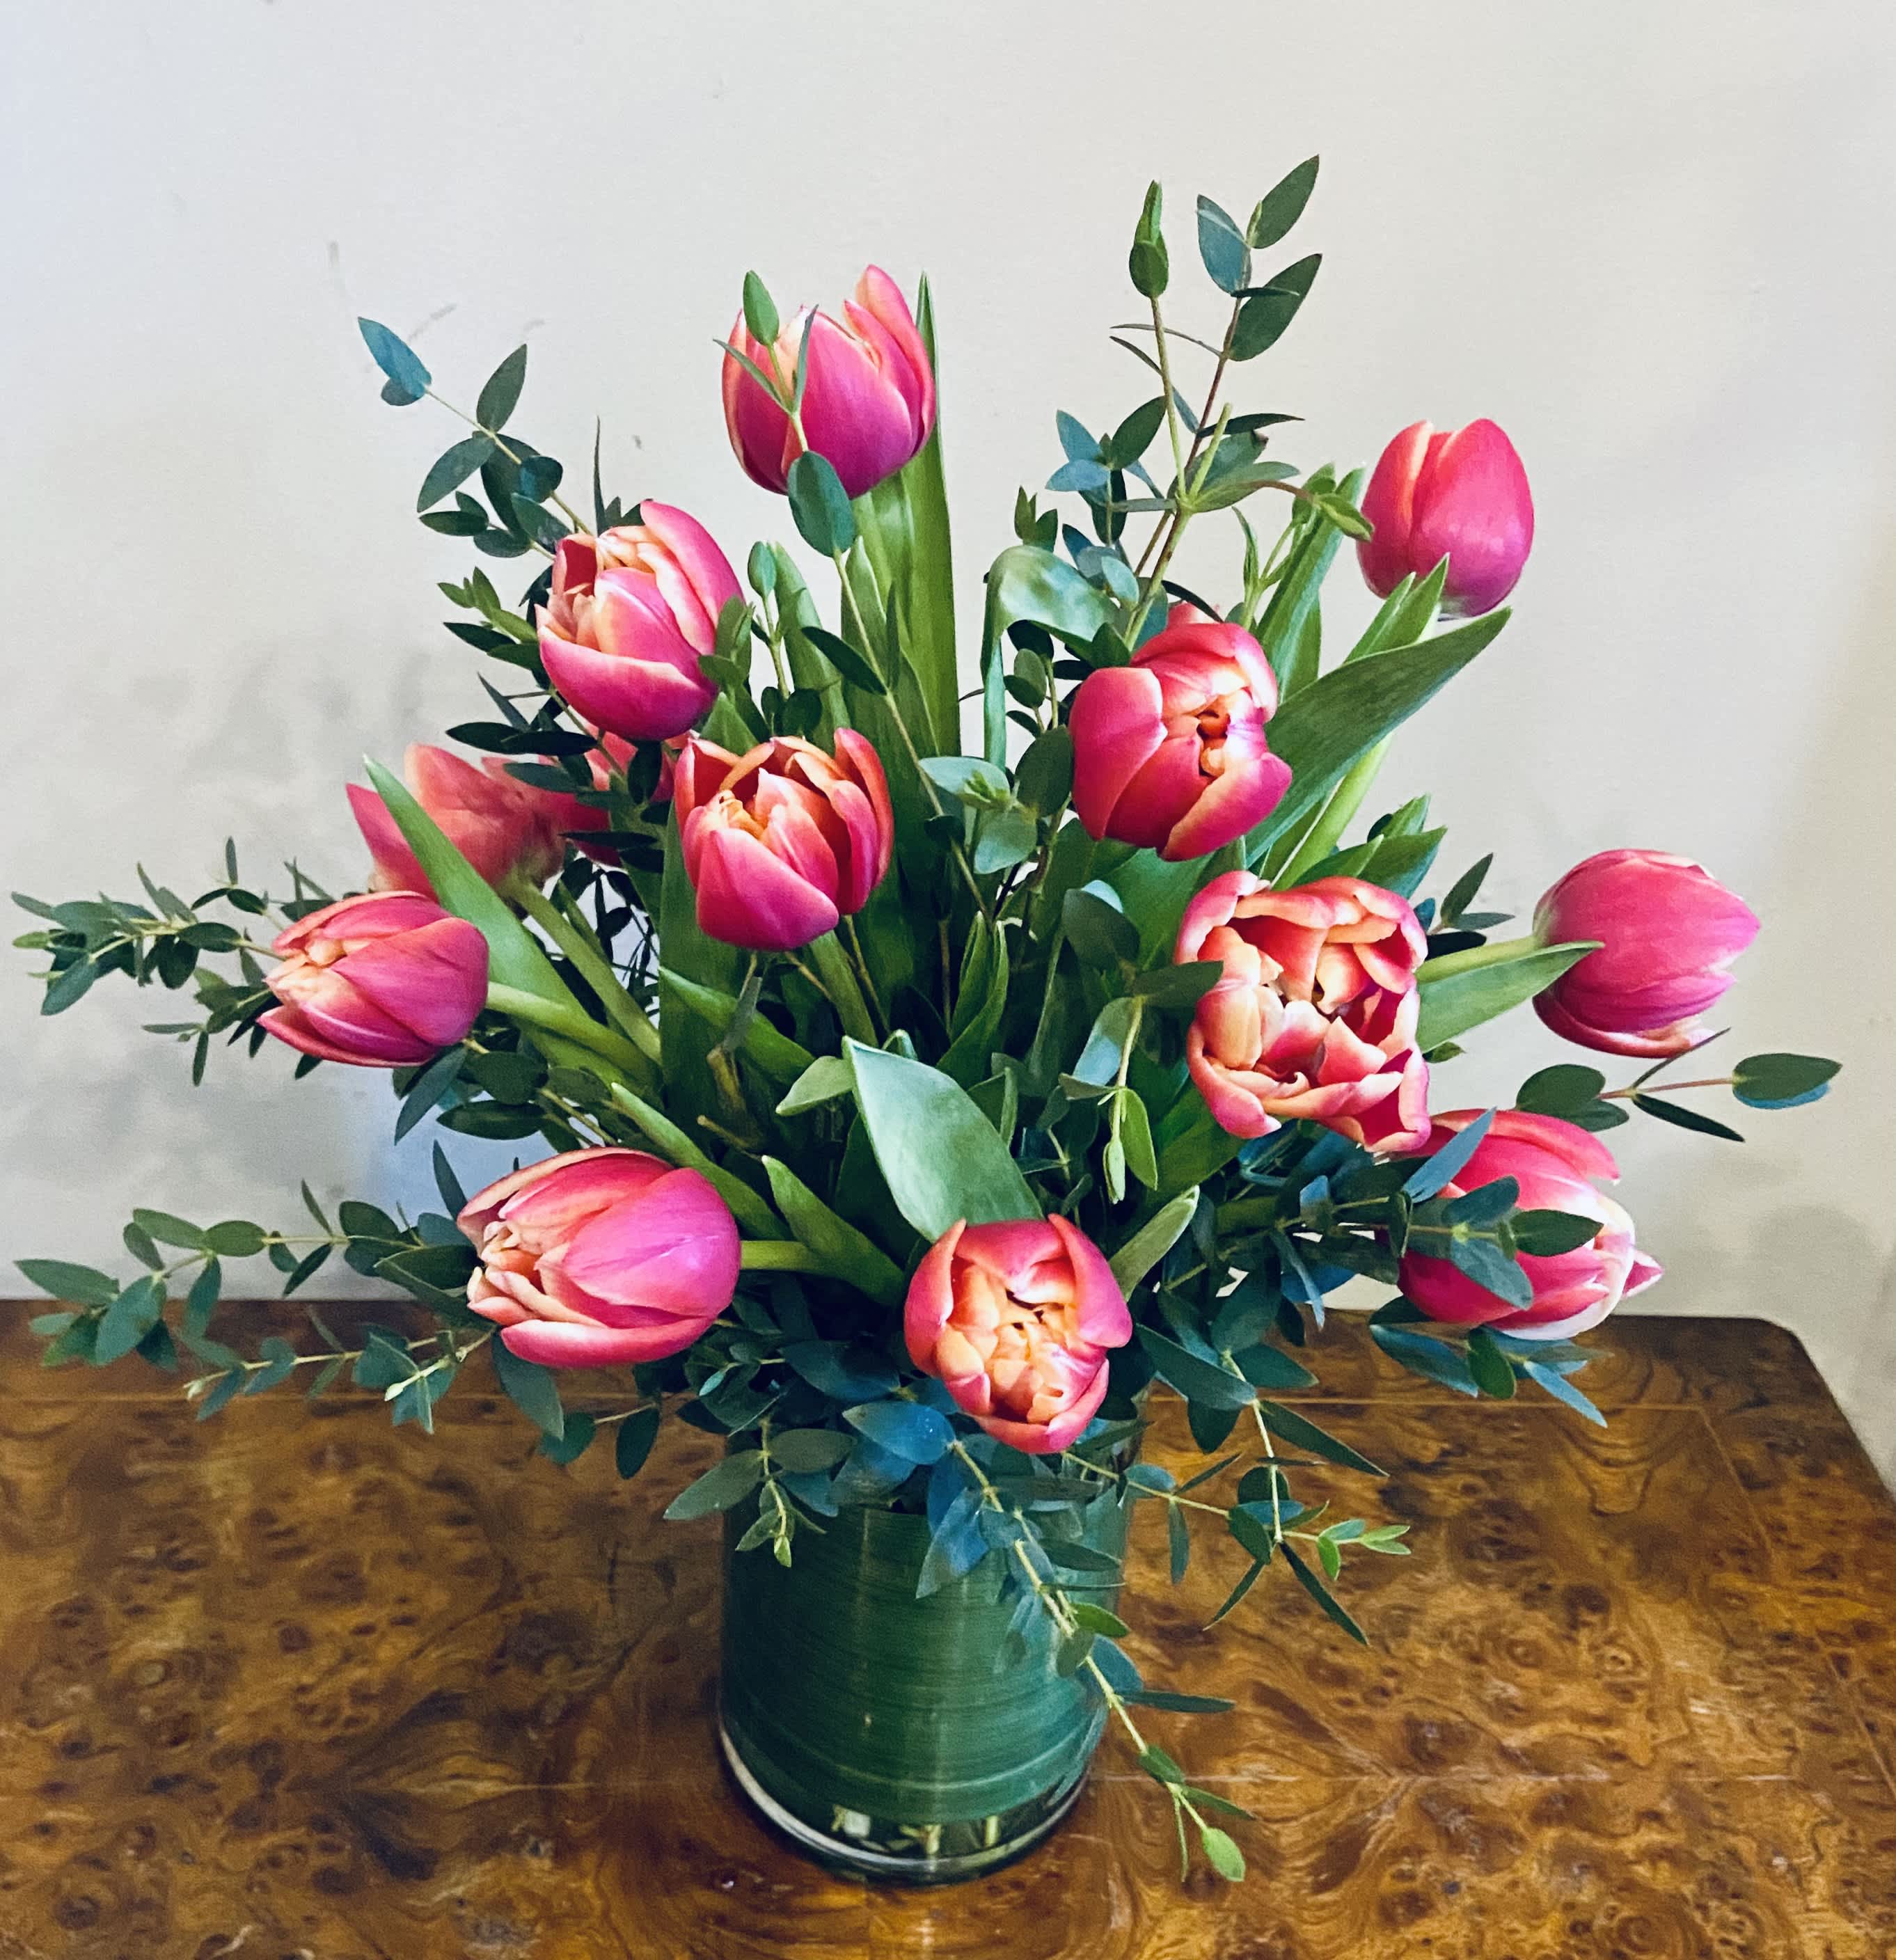 Lovely Spring Tulips - Lovely lipstick Dutch tulips arranged in a vase or clear glass cylinder. Best color of tulips available for the day will be used.